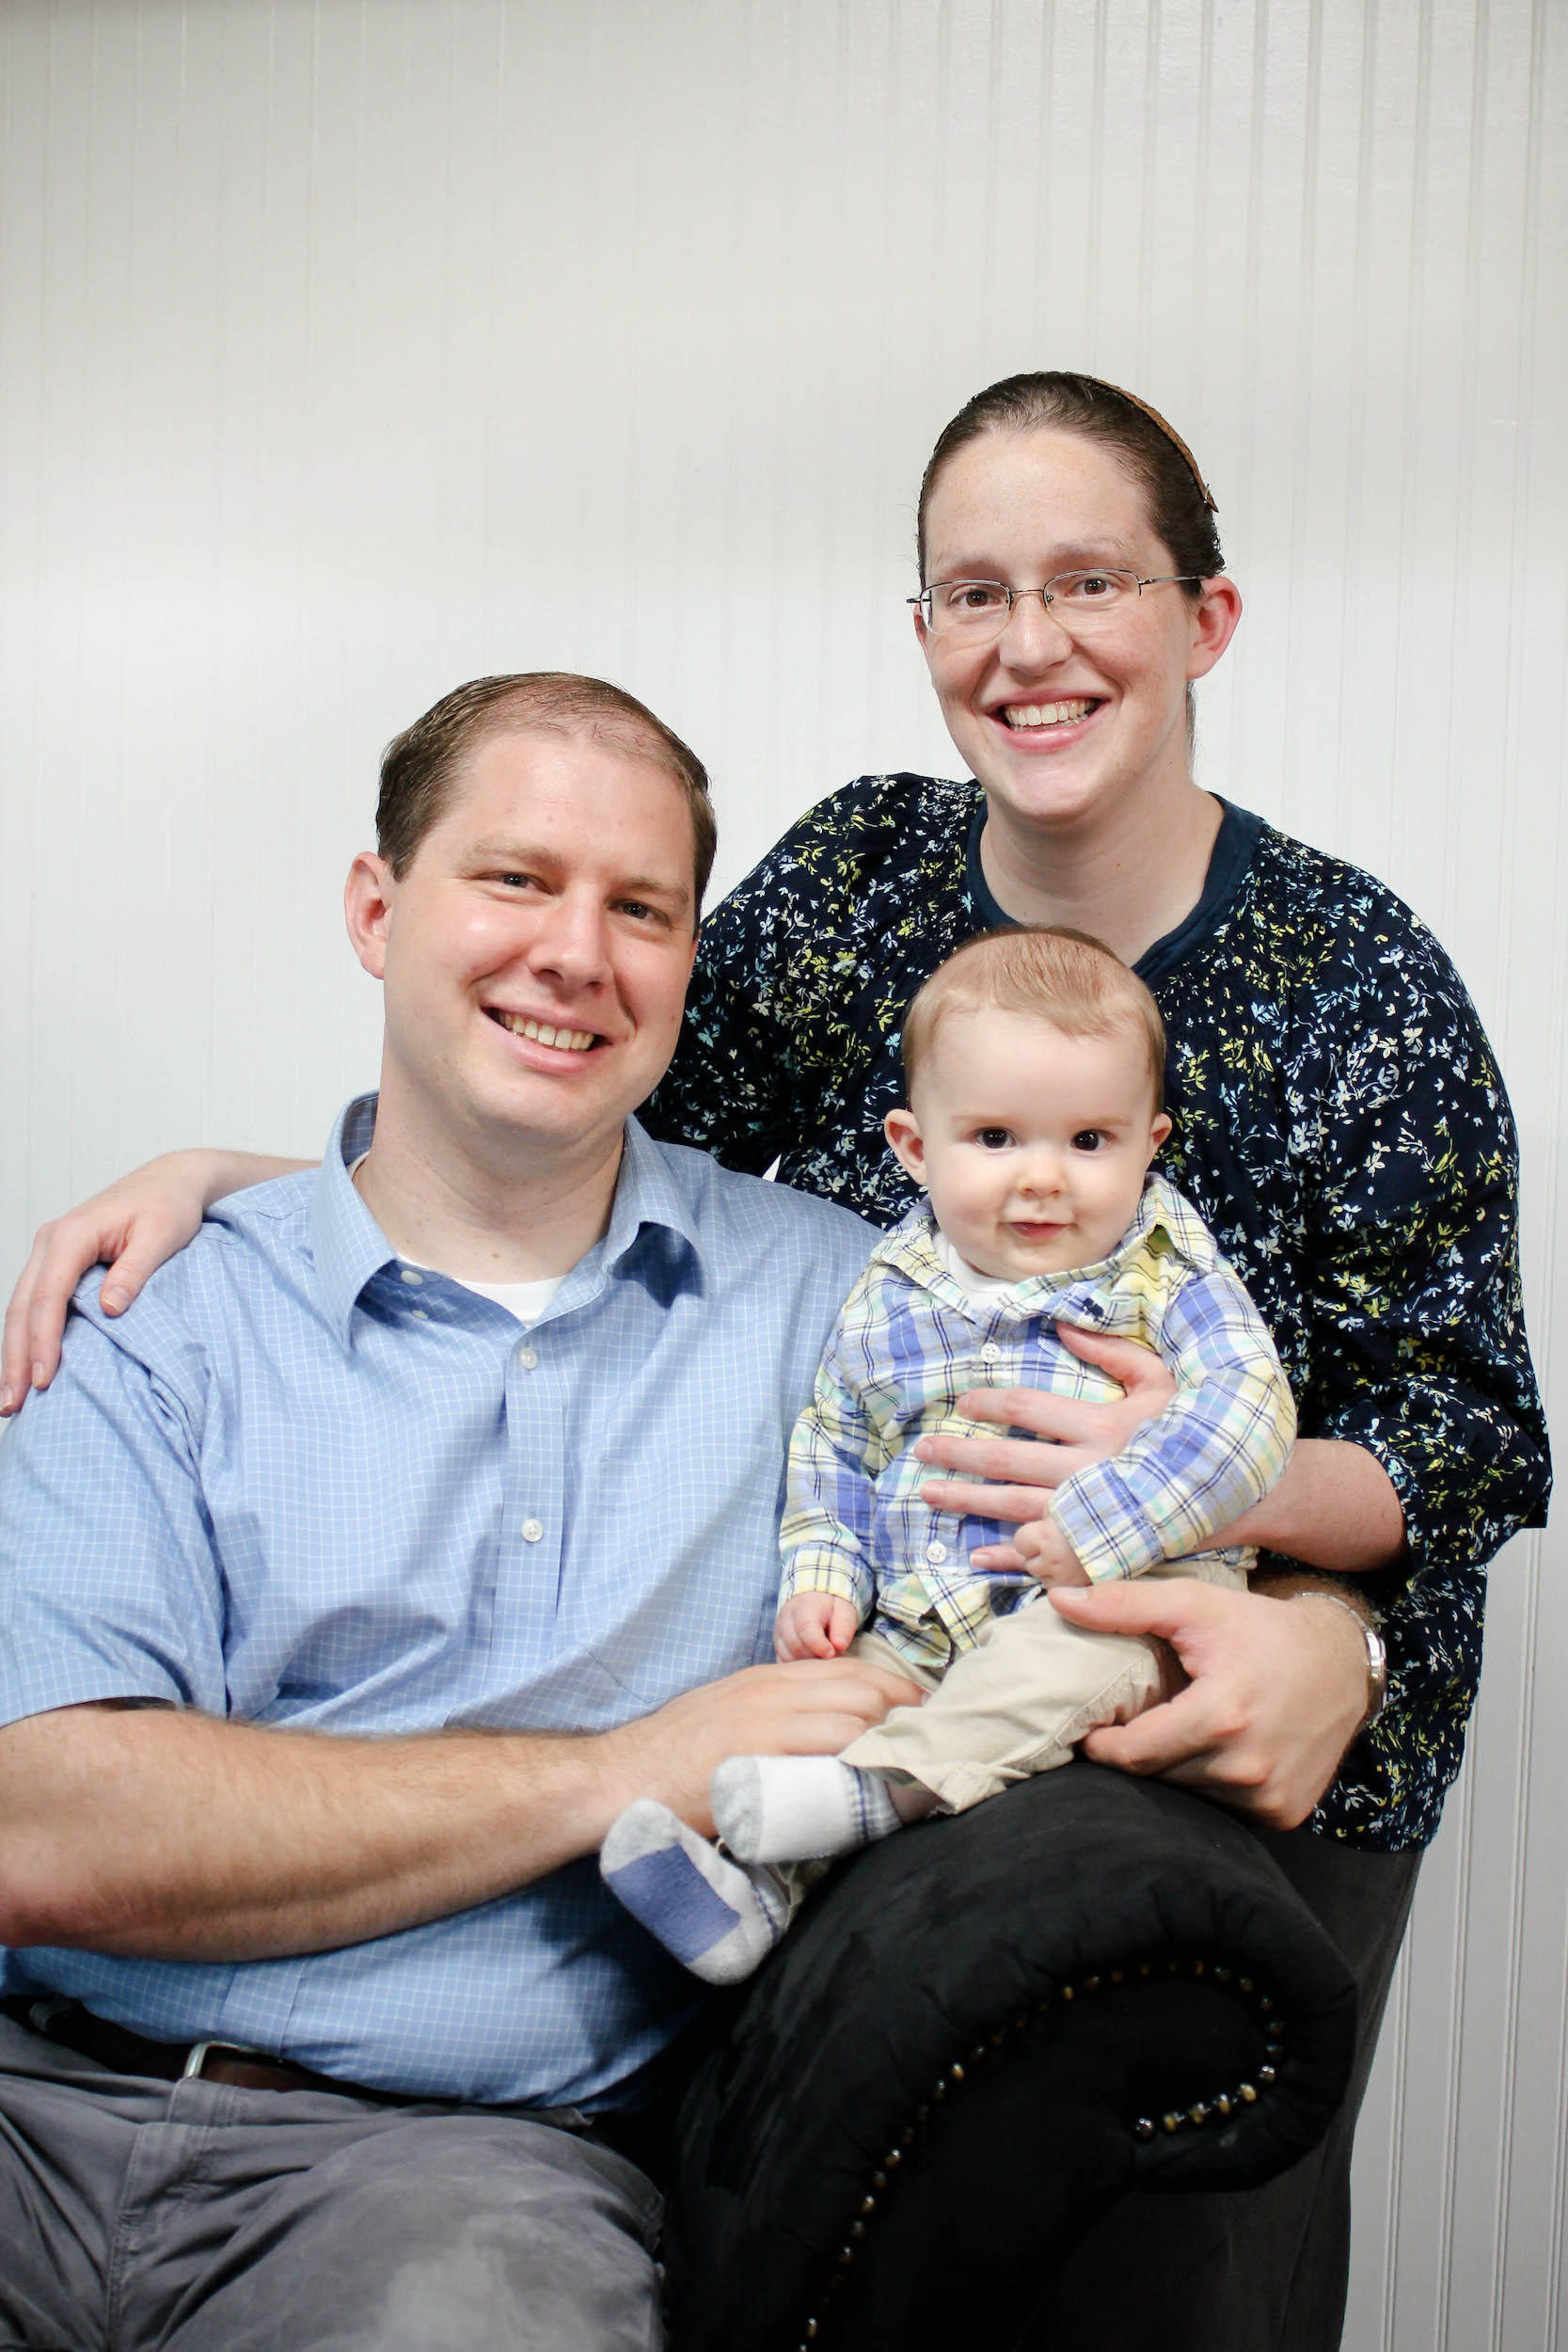 Greg Bradle (home inspector and owner of LPI), with his wife Lydia and 6 month boy, Connor